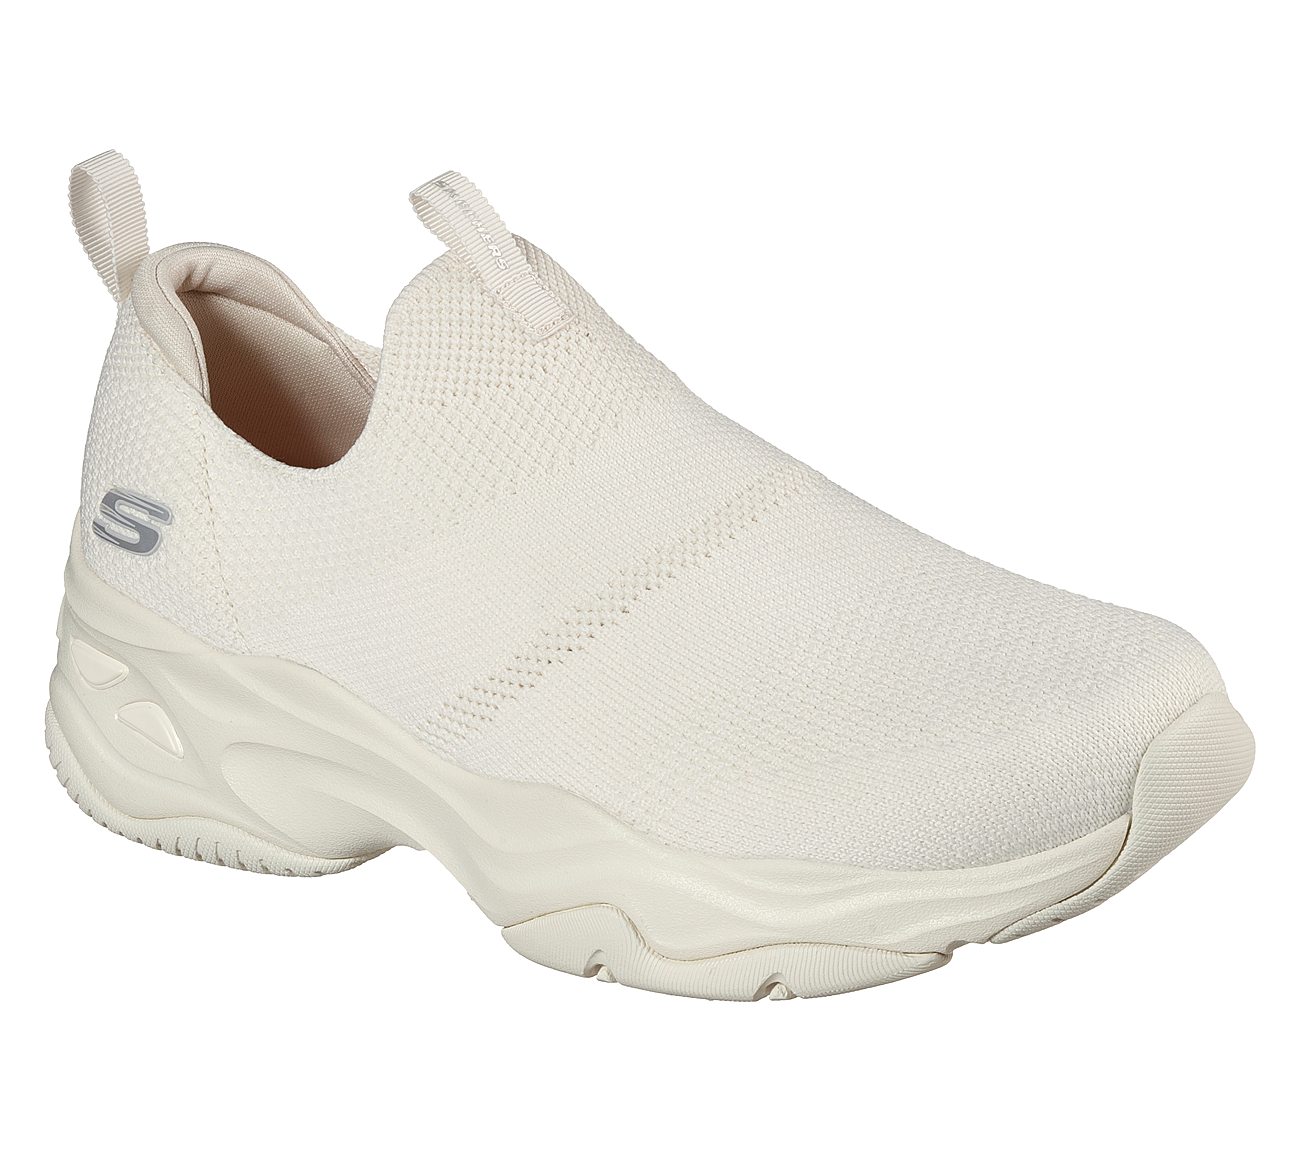 D'LITES 4.0-PERFECT FLOW, OFF WHITE Footwear Right View